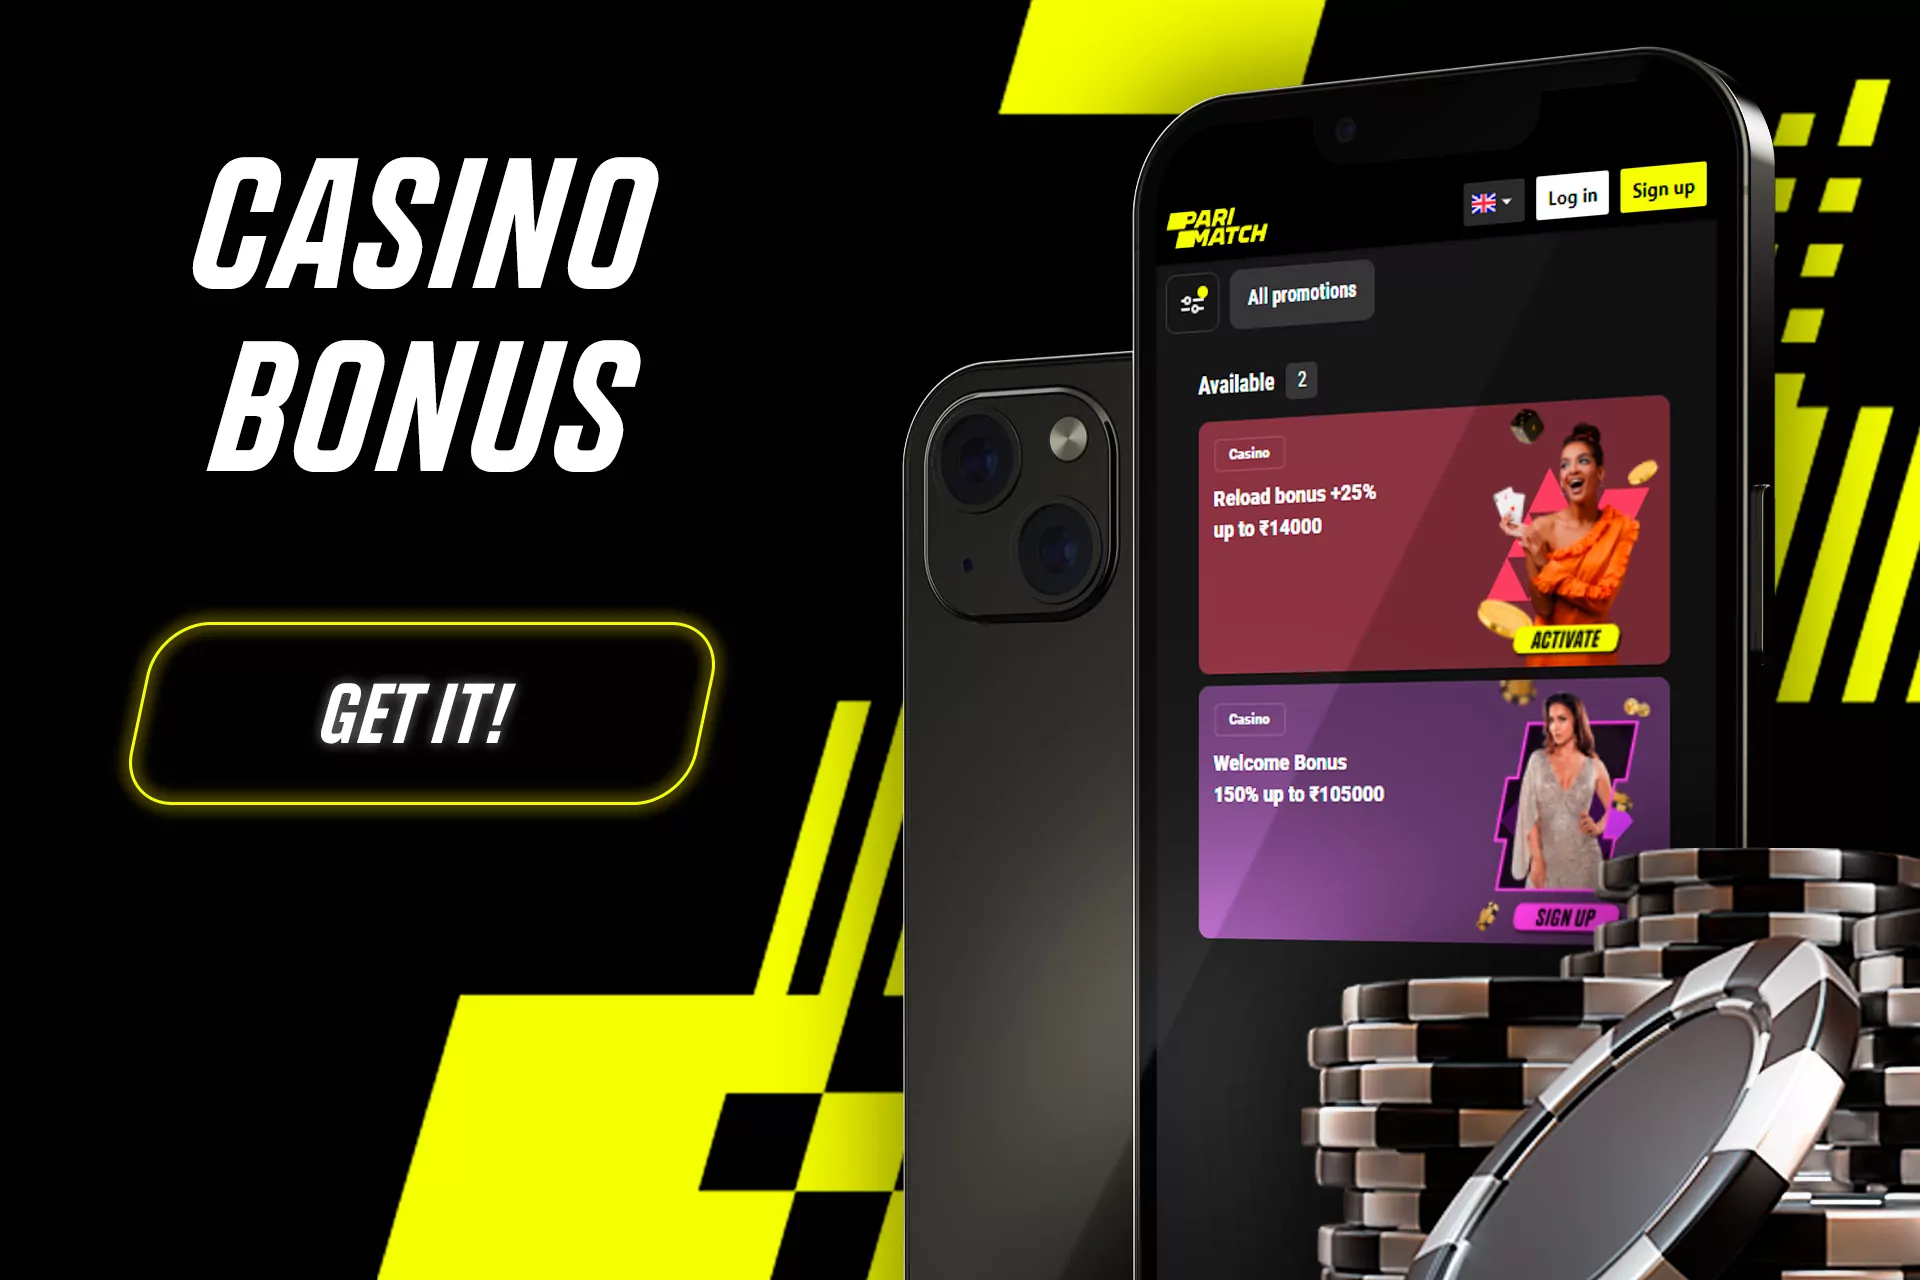 Besides betting bonuses, Parimatch suggests promotions for casino players as well.